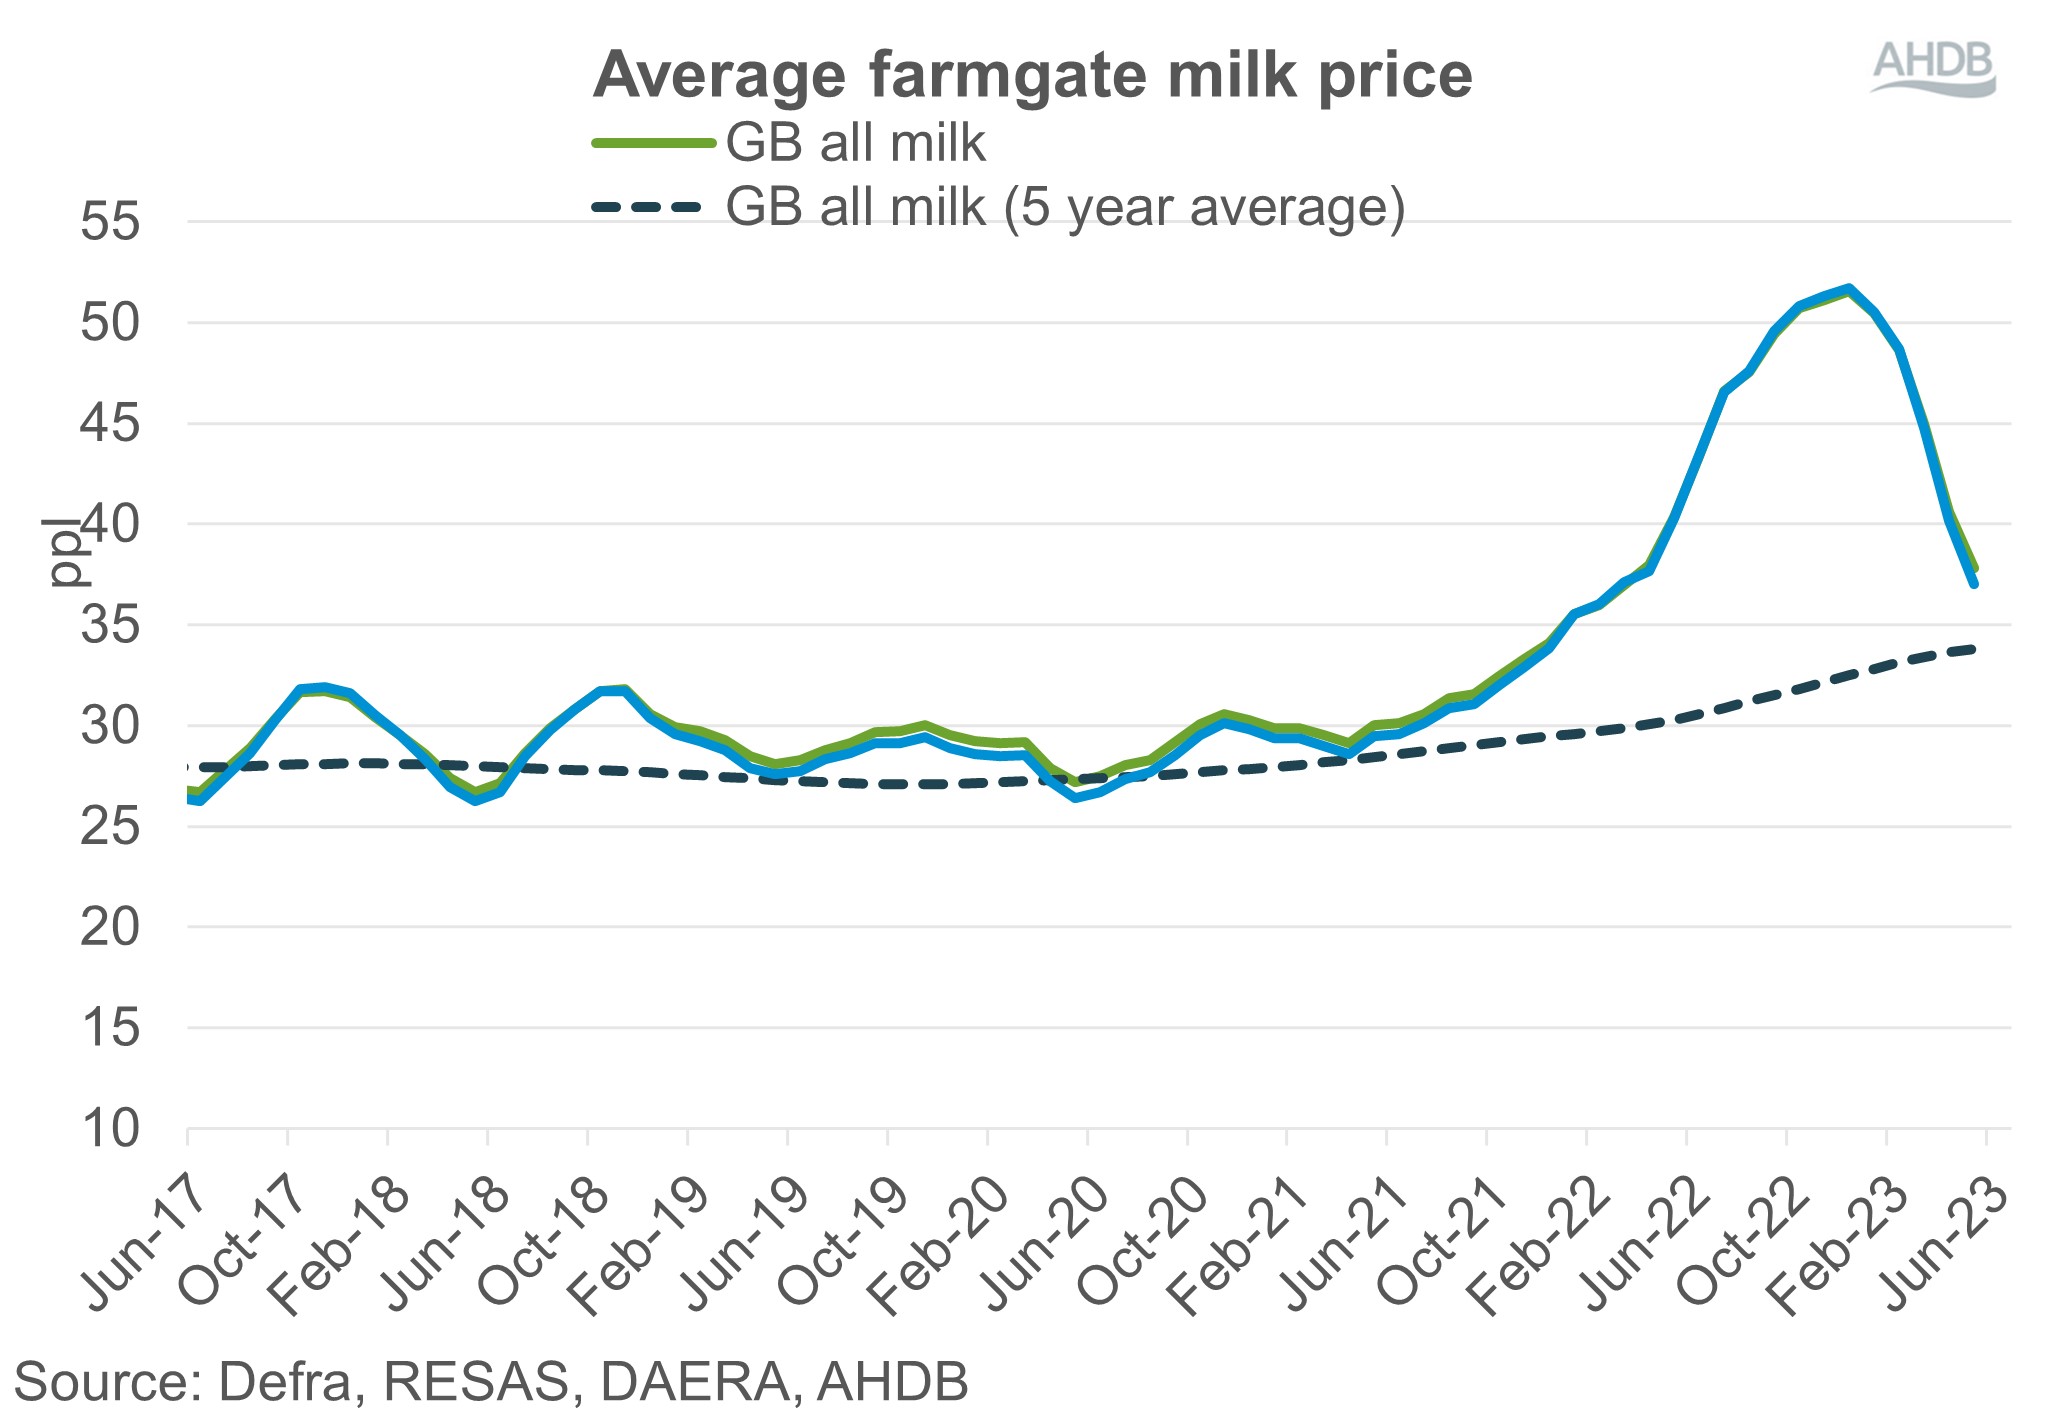 Graph showing frmgate milk prices rose then fell to 36.5 ppl